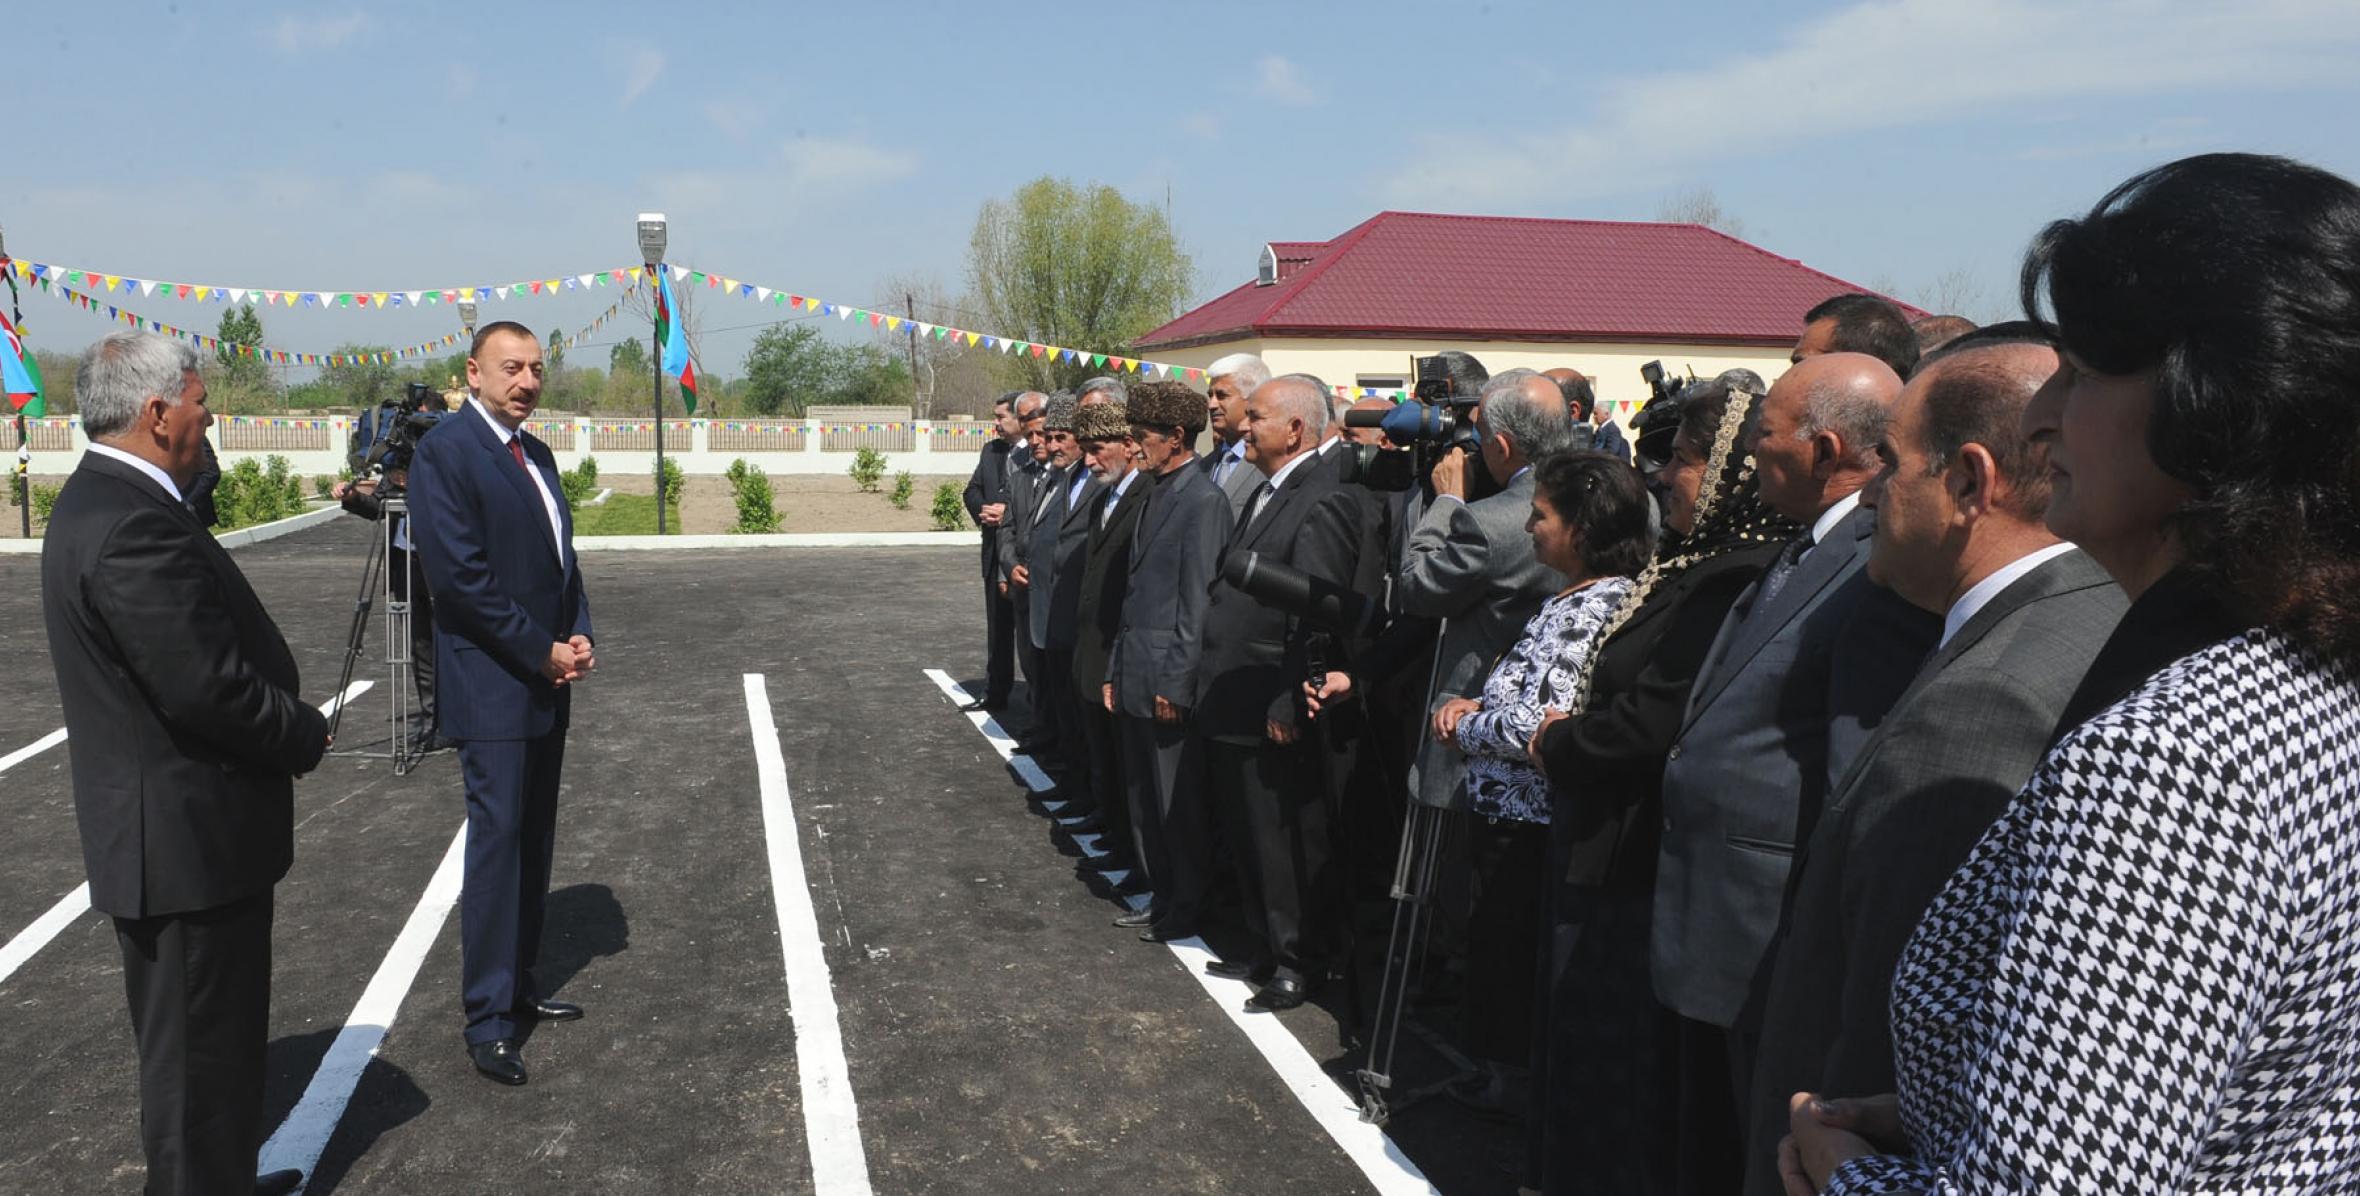 Ilham Aliyev met with representatives of the public in the Gasimbayli village of Sabirabad District